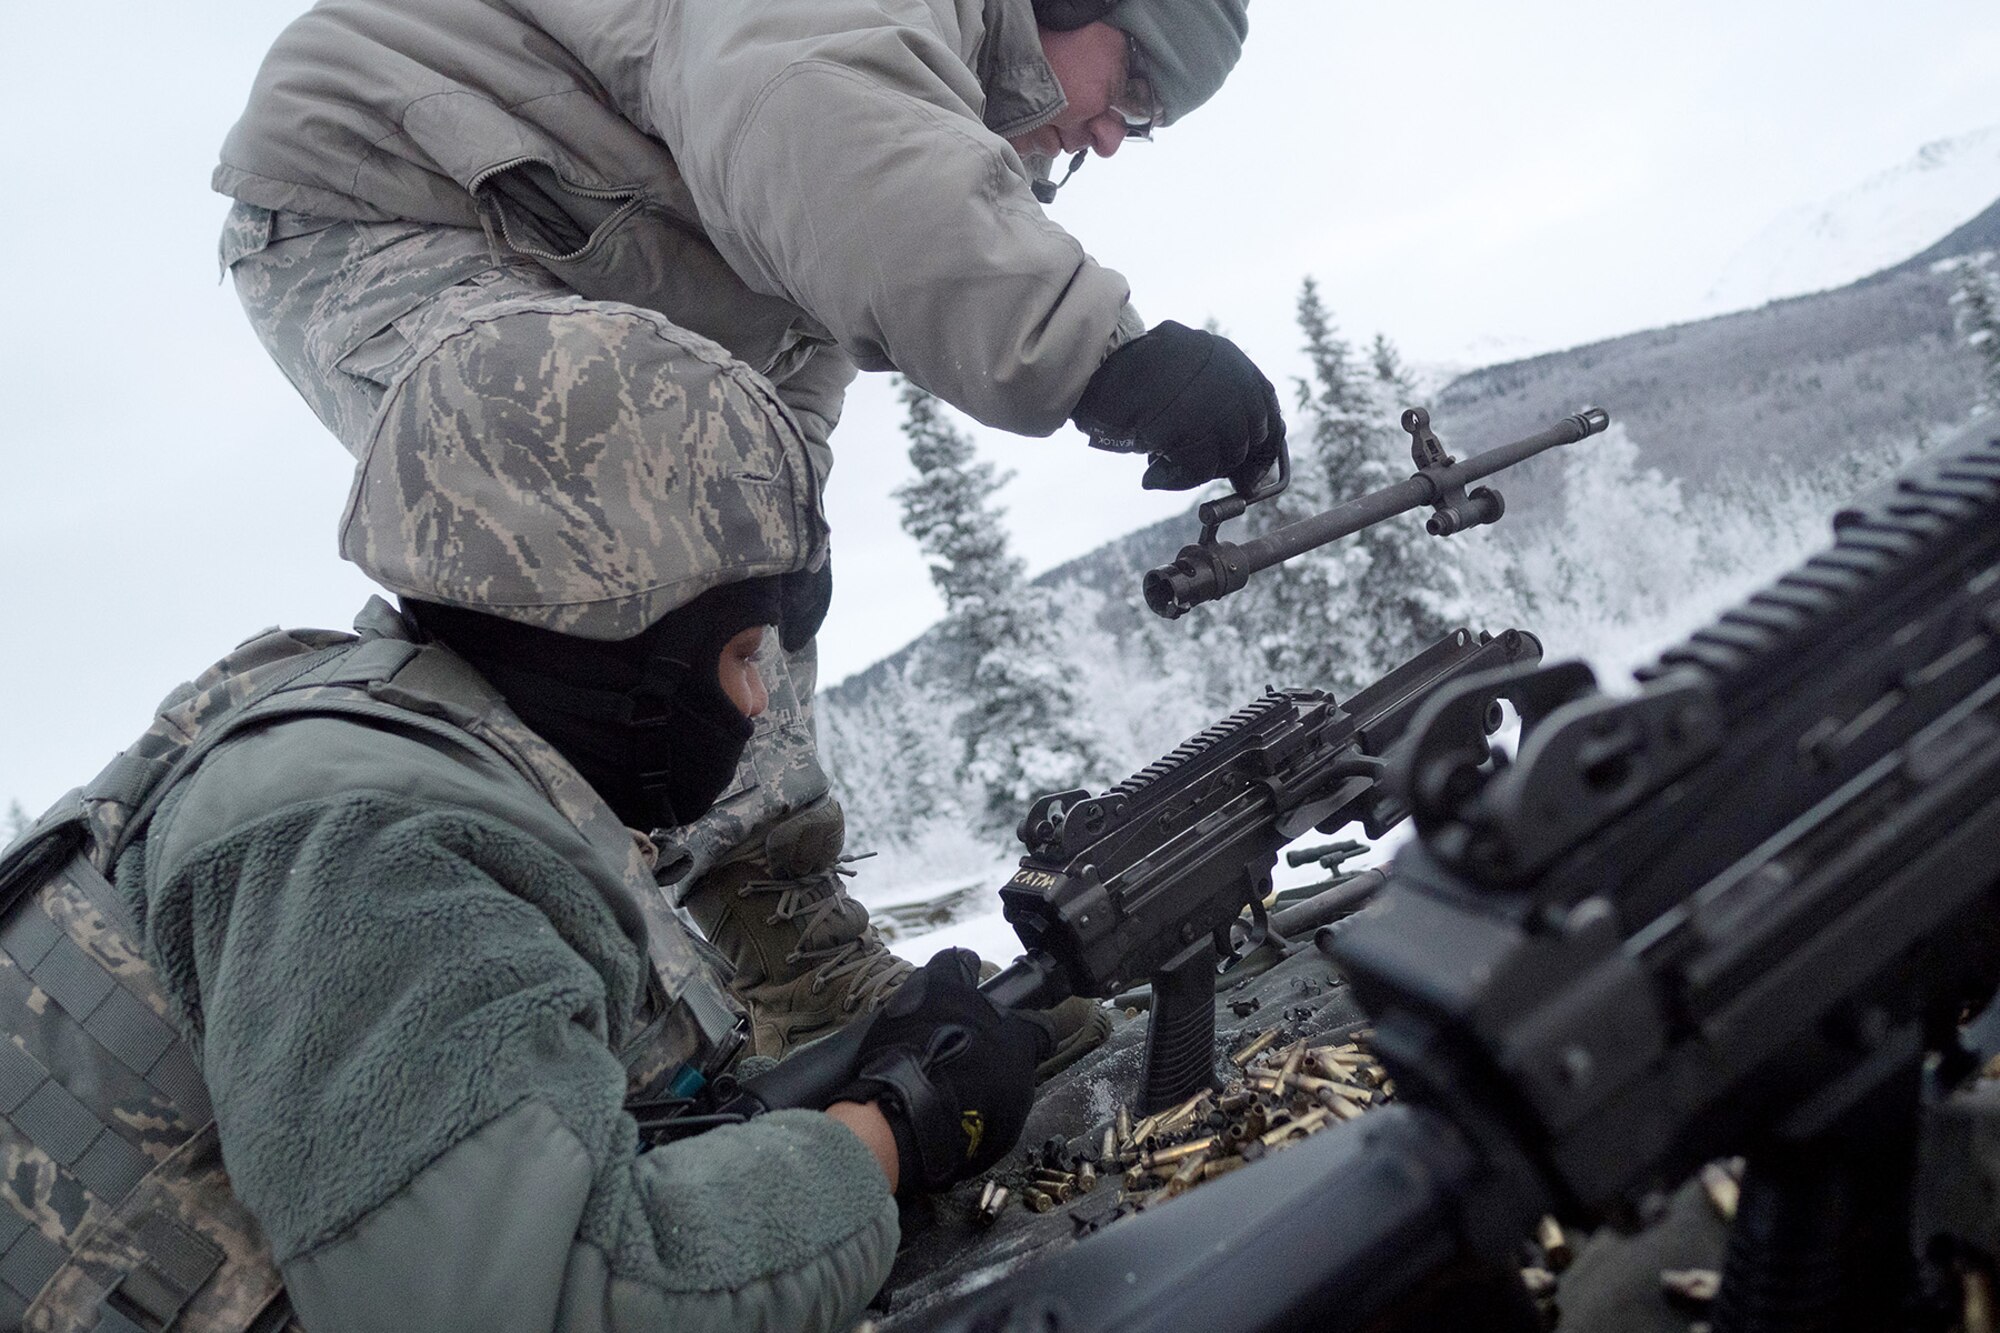 Senior Airman Cody Morgan, a native of New Salisbury, Ind., removes the barrel of an M249 Squad Automatic Weapon for Airman 1st Class Kaylon Thomas, a native of Conway, Ark., as Airmen assigned to the 673d Security Forces Squadron conduct machine gun qualification range on Joint Base Elmendorf-Richardson, Alaska, Jan. 10, 2018. Security Forces Airmen perform extensive training in law enforcement as well as combat tactics to protect U.S. Military bases and assets both stateside and overseas.